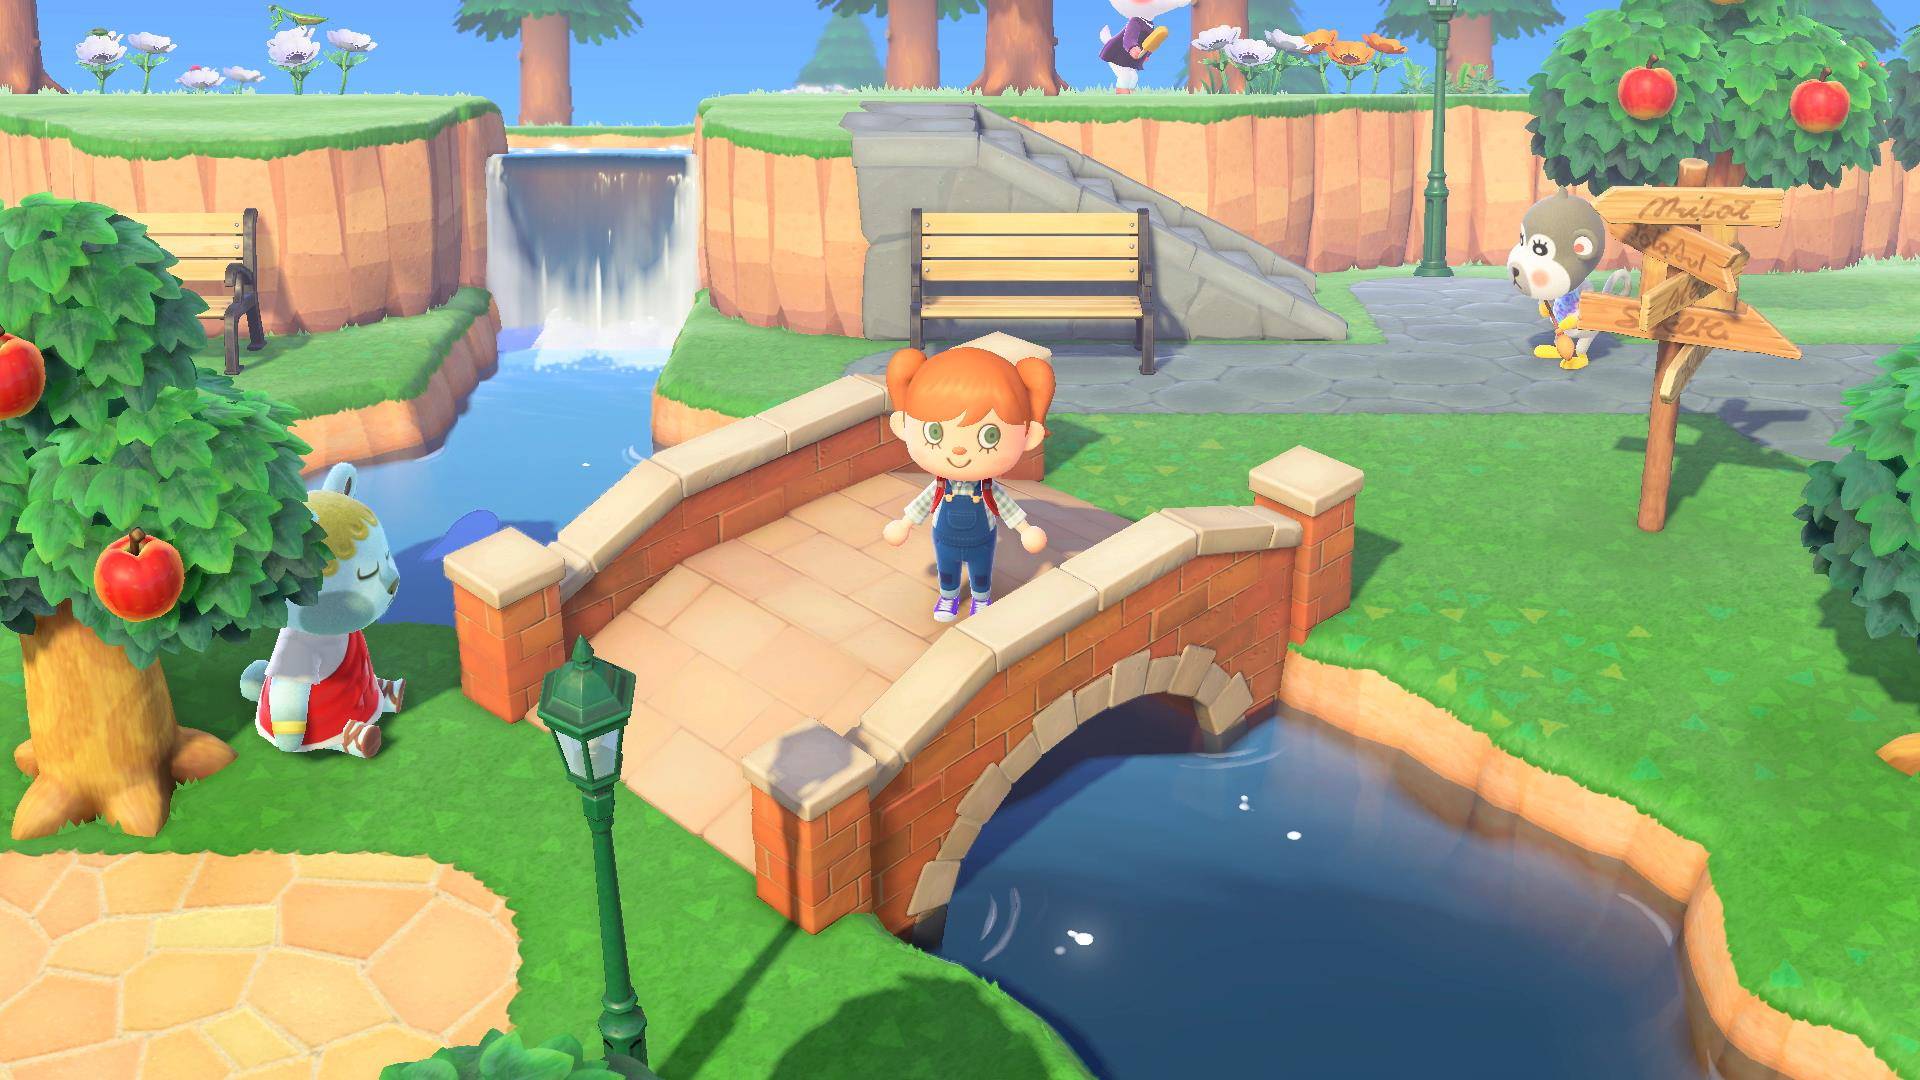 Best Nintendo Switch games: a cute female character indungarees standsin a bridge inanimal crossing 